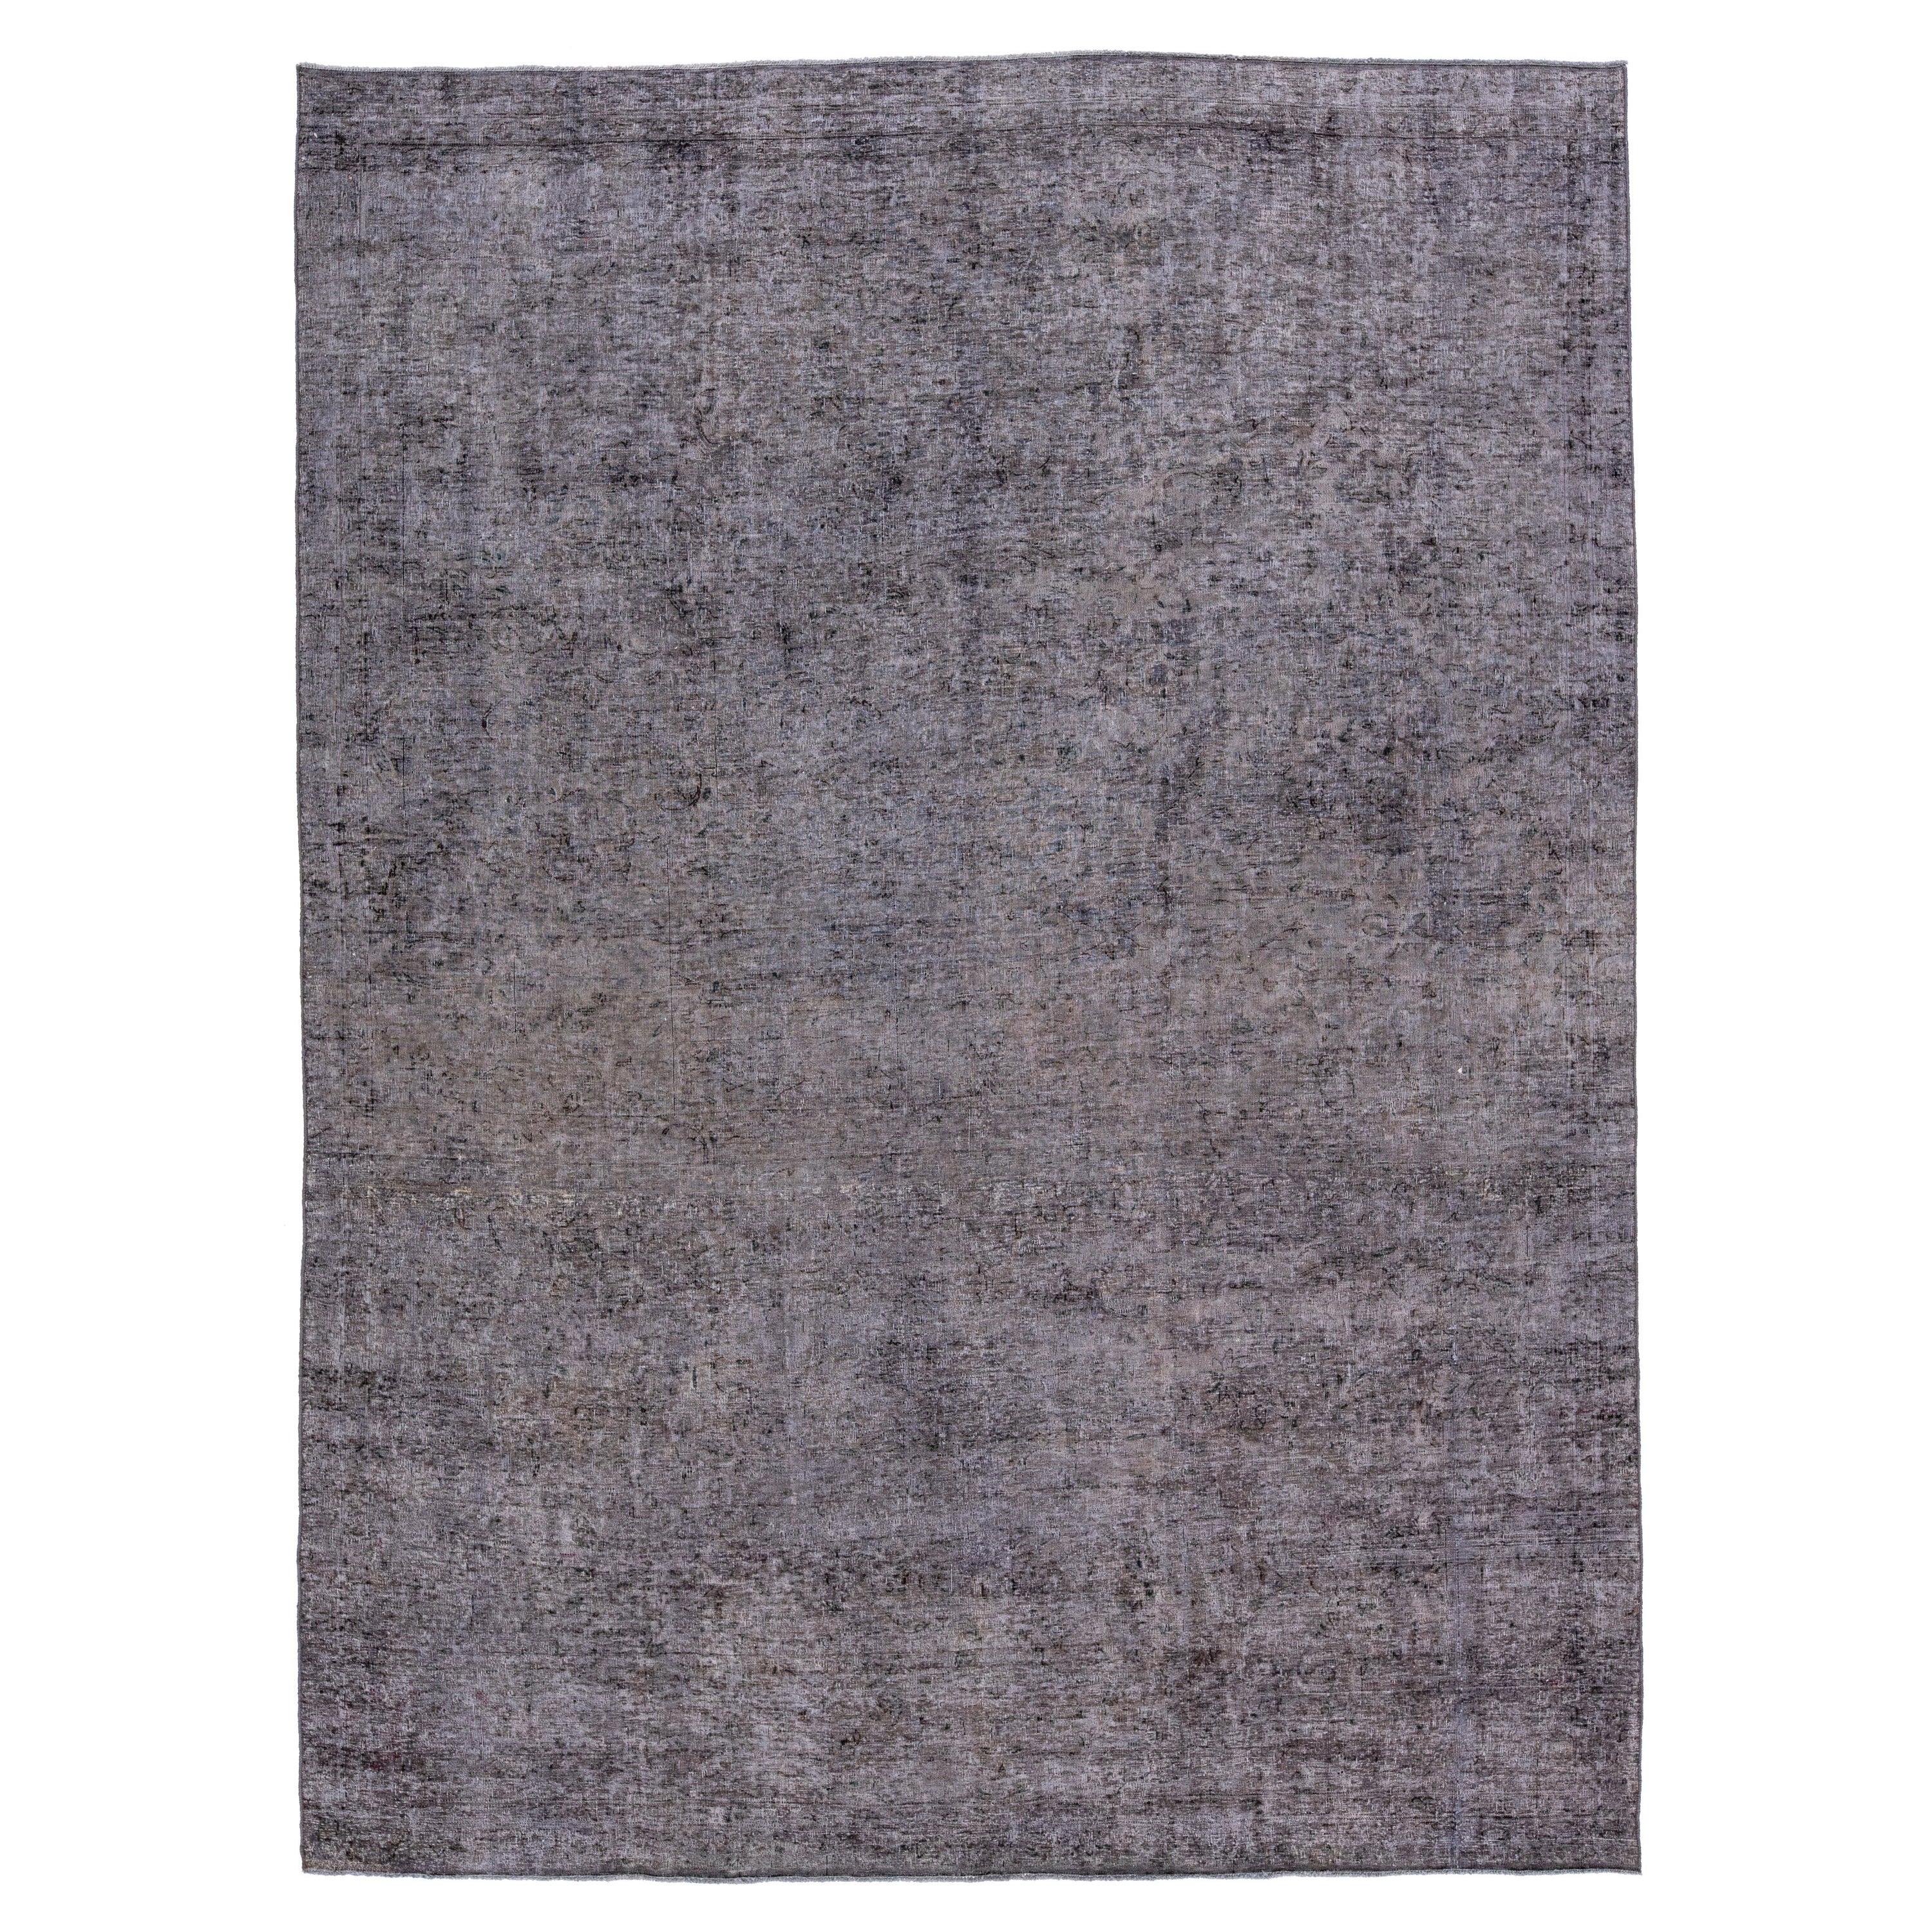 Vintage Persian Overdyed Handmade All-Over Gray Wool Rug